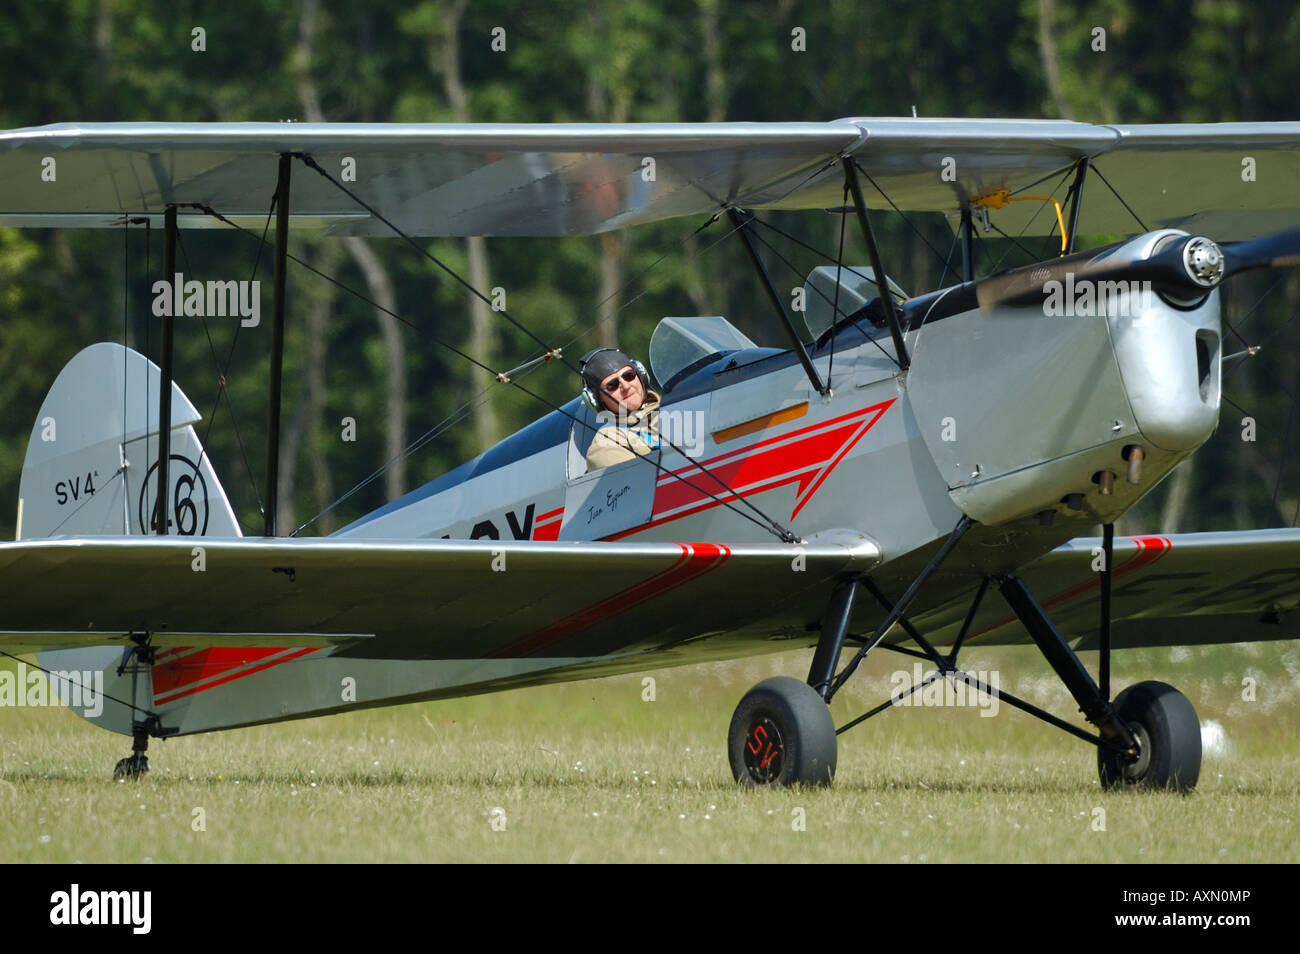 Old french trainer biplane Stampe SV-4a, french vintage air show, La Ferte Alais, France Stock Photo